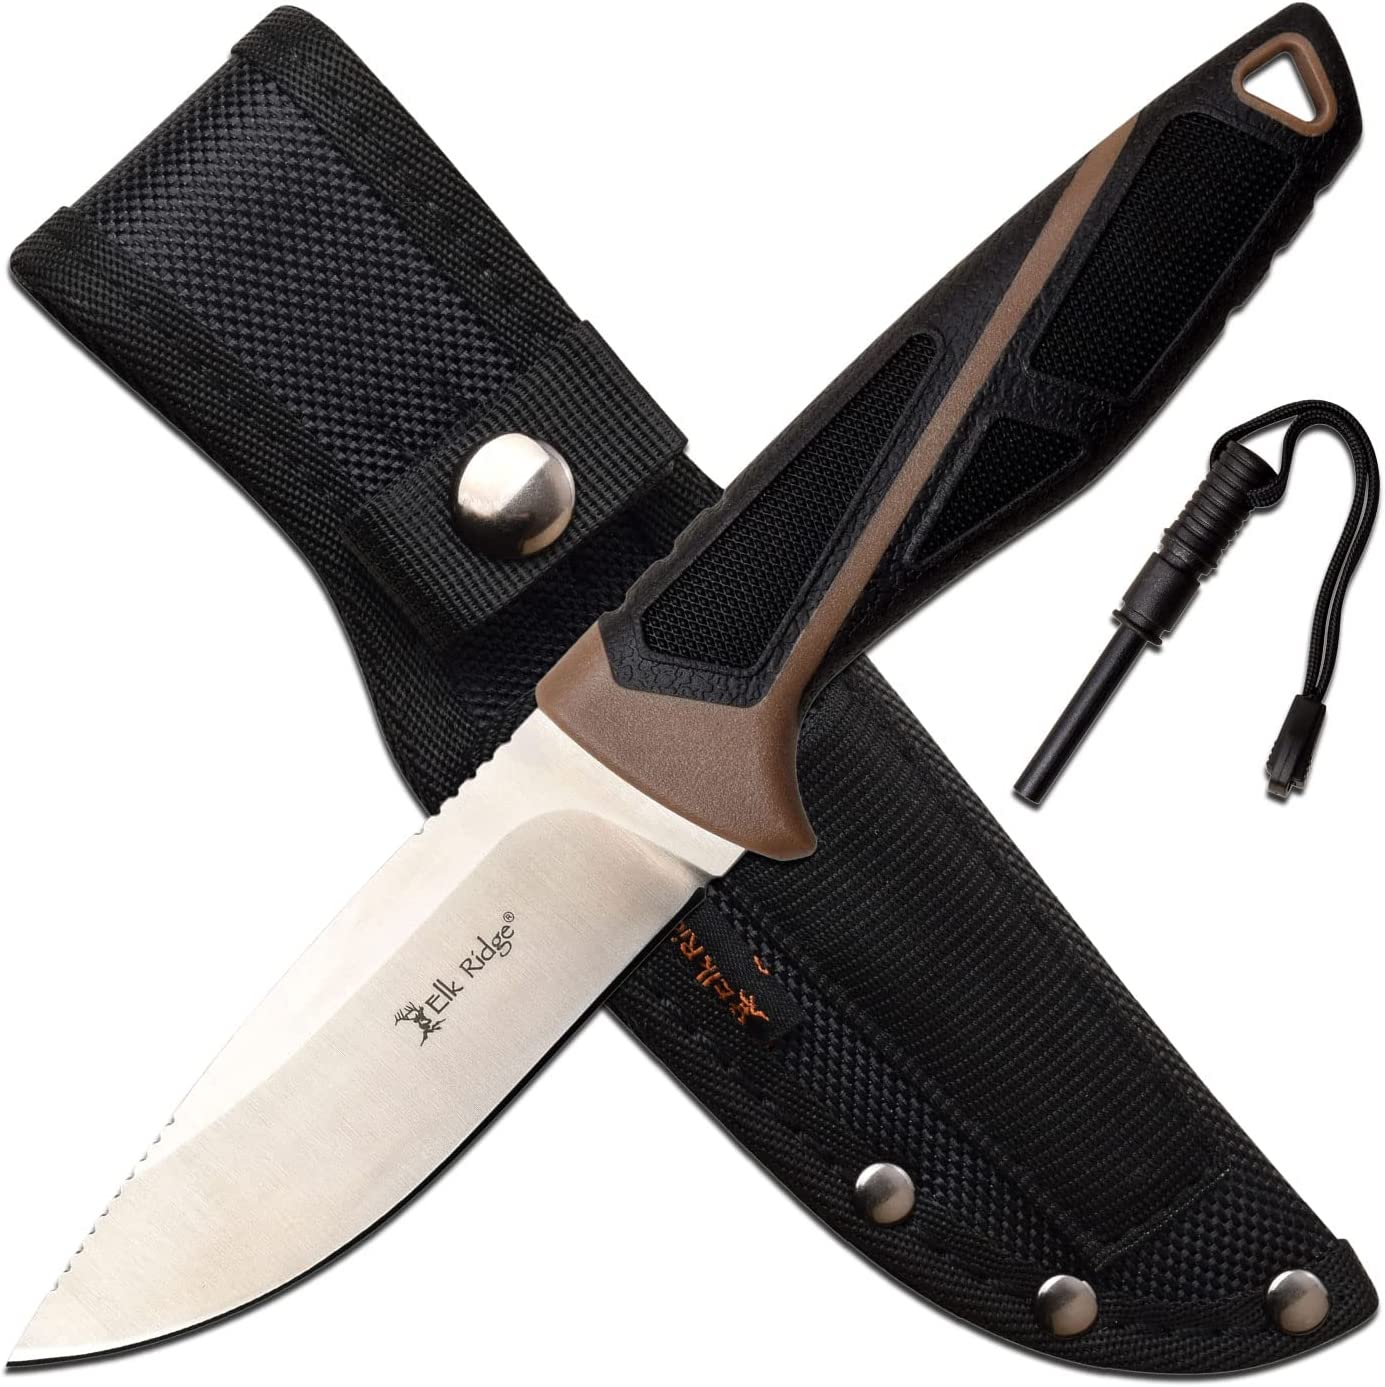 Elk Ridge – Outdoors Fixed Blade Knife – 4-in Satin Finish Stainless Steel Blade, Black and Brown Nylon Fiber Handle with Rubber – Nylon Sheath, Fire Starter – Hunting, Camping, Survival – ER-200-23BR